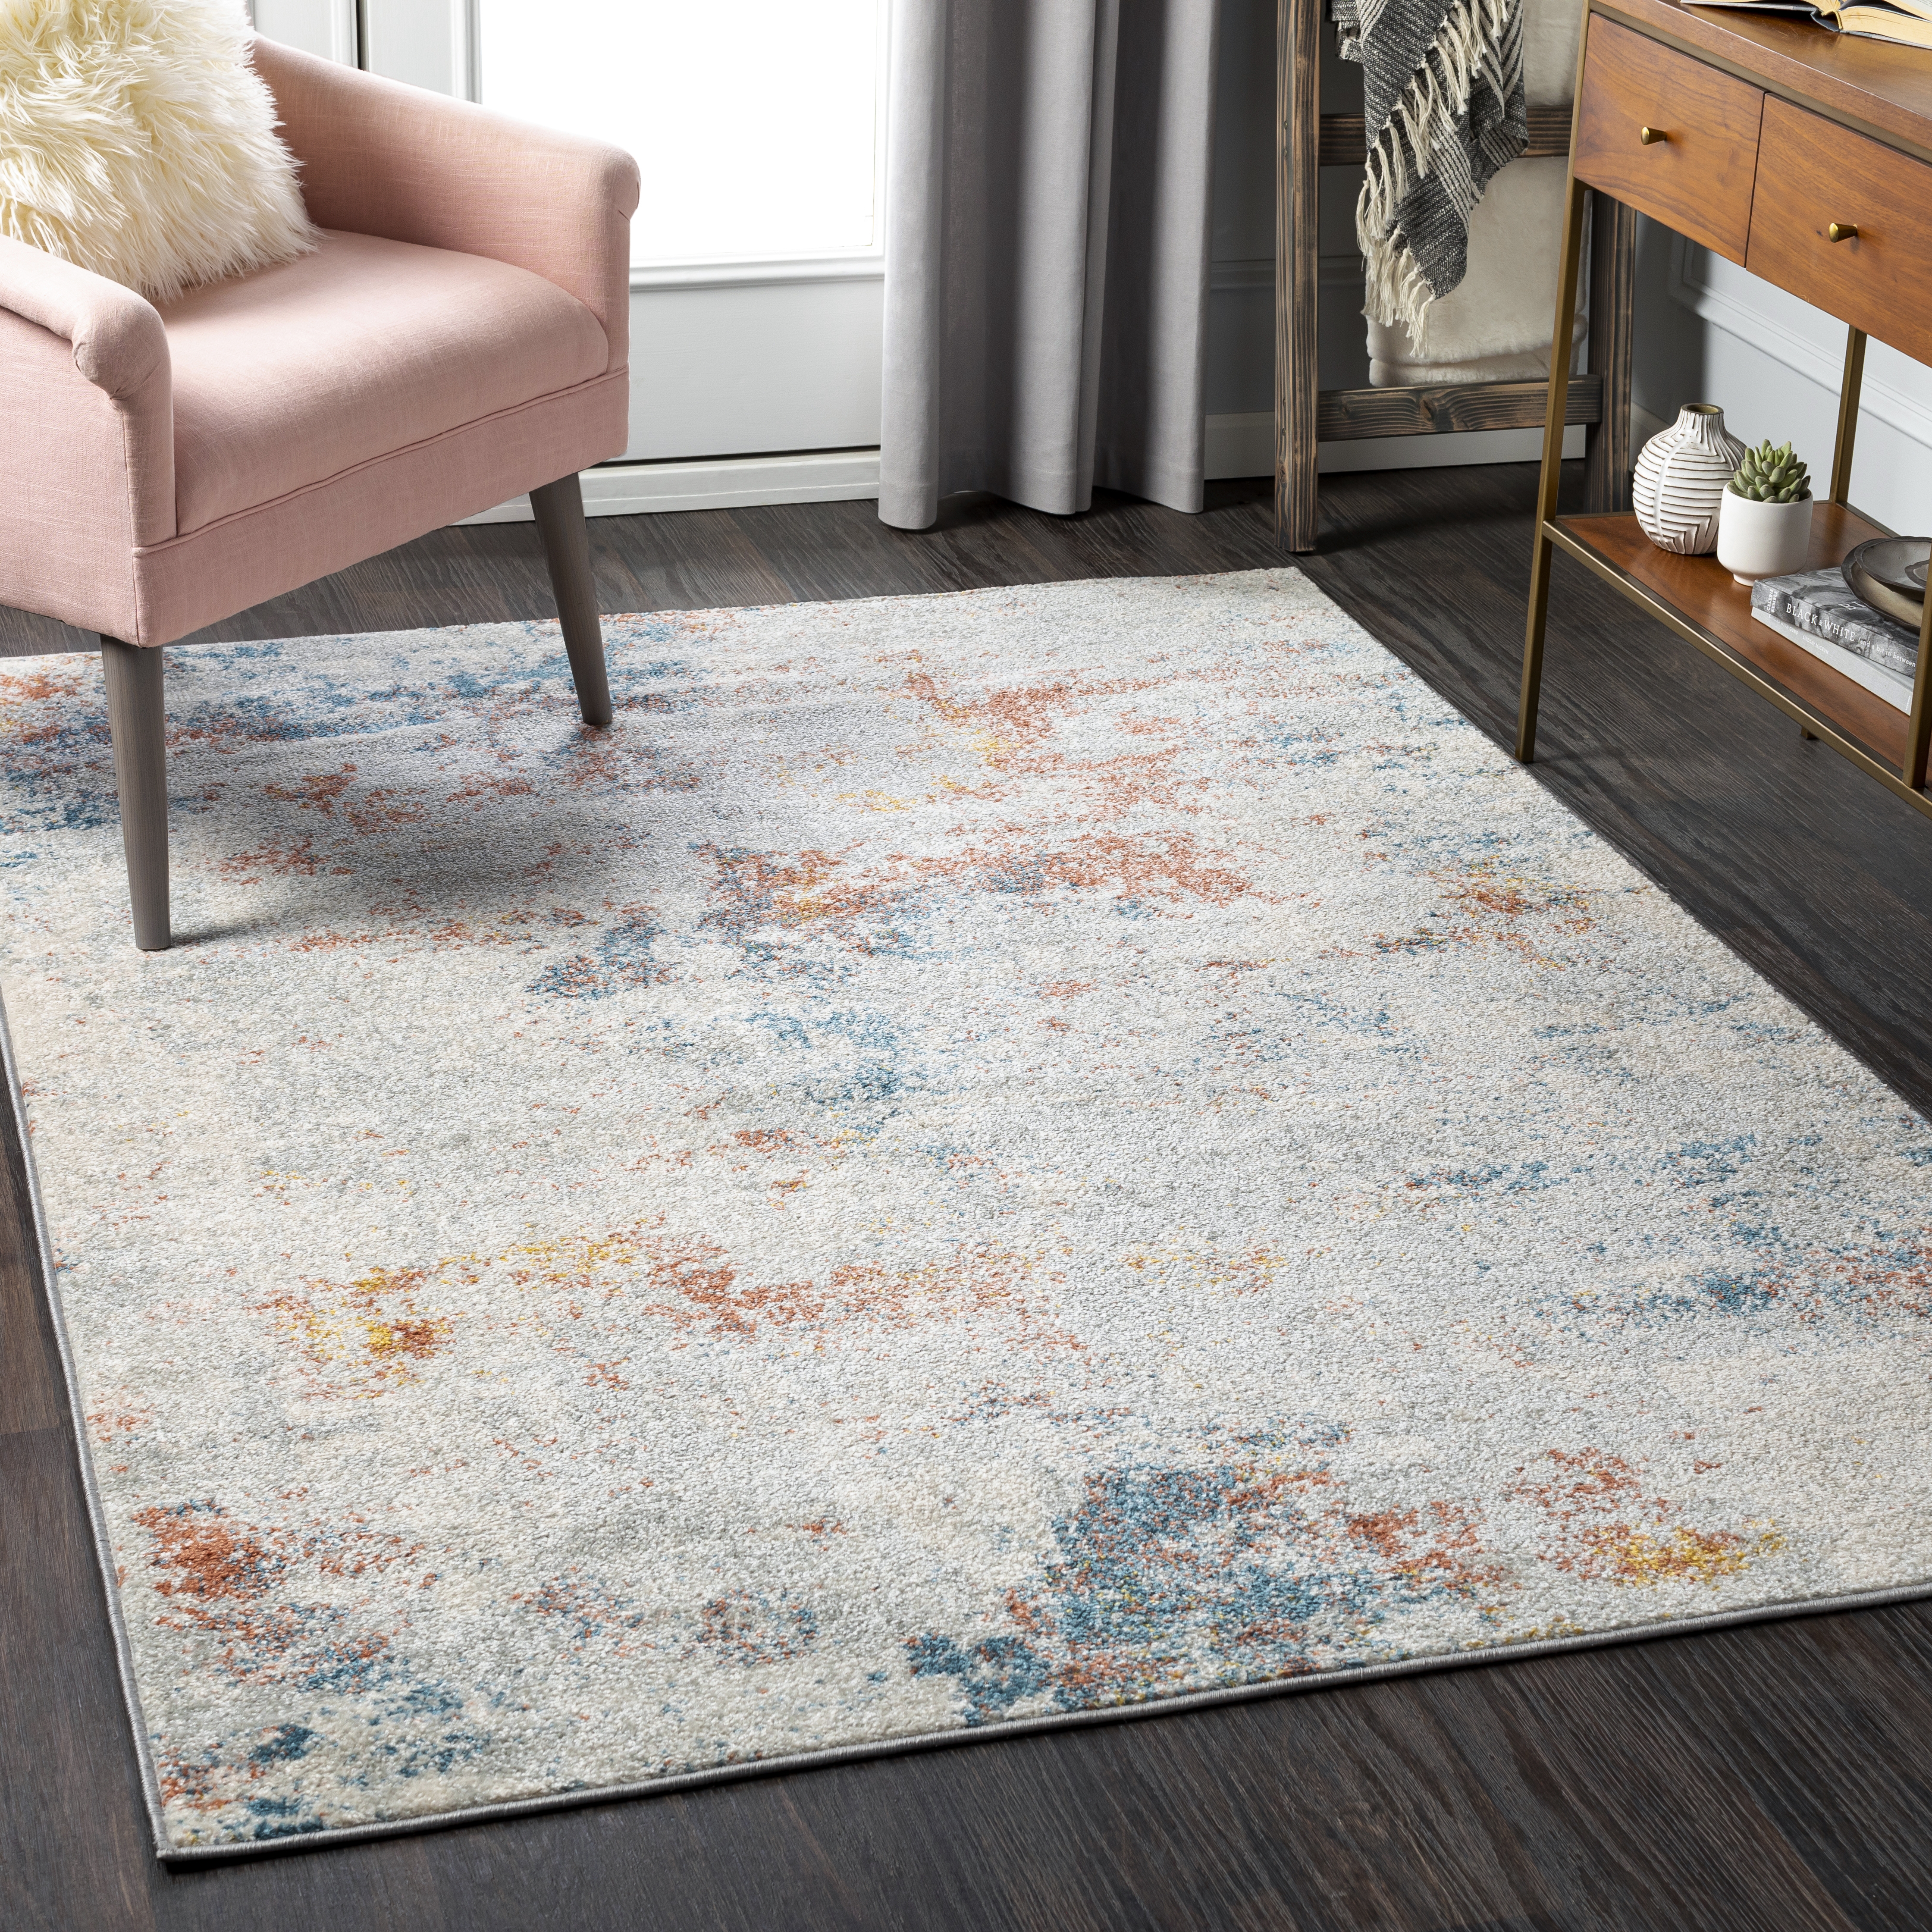 Chester Rug, 7'10" x 10'3" - Image 1